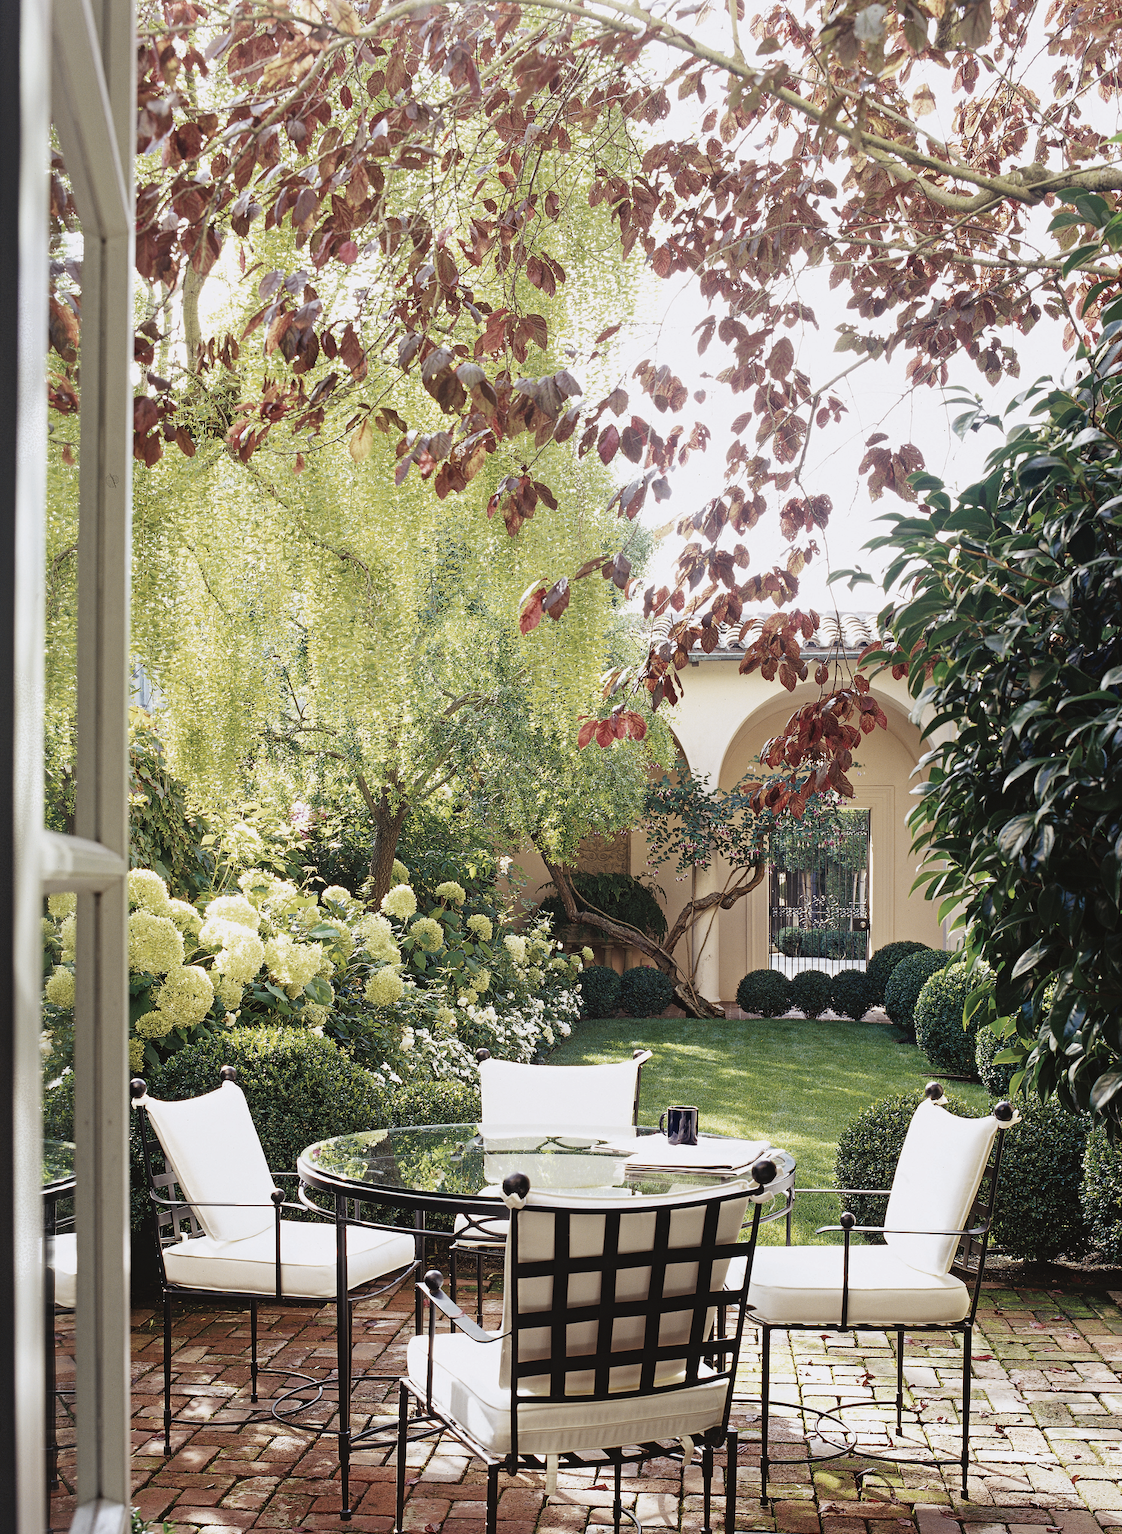 Transform Your Outdoor Oasis With These 61 Modern Patio Ideas